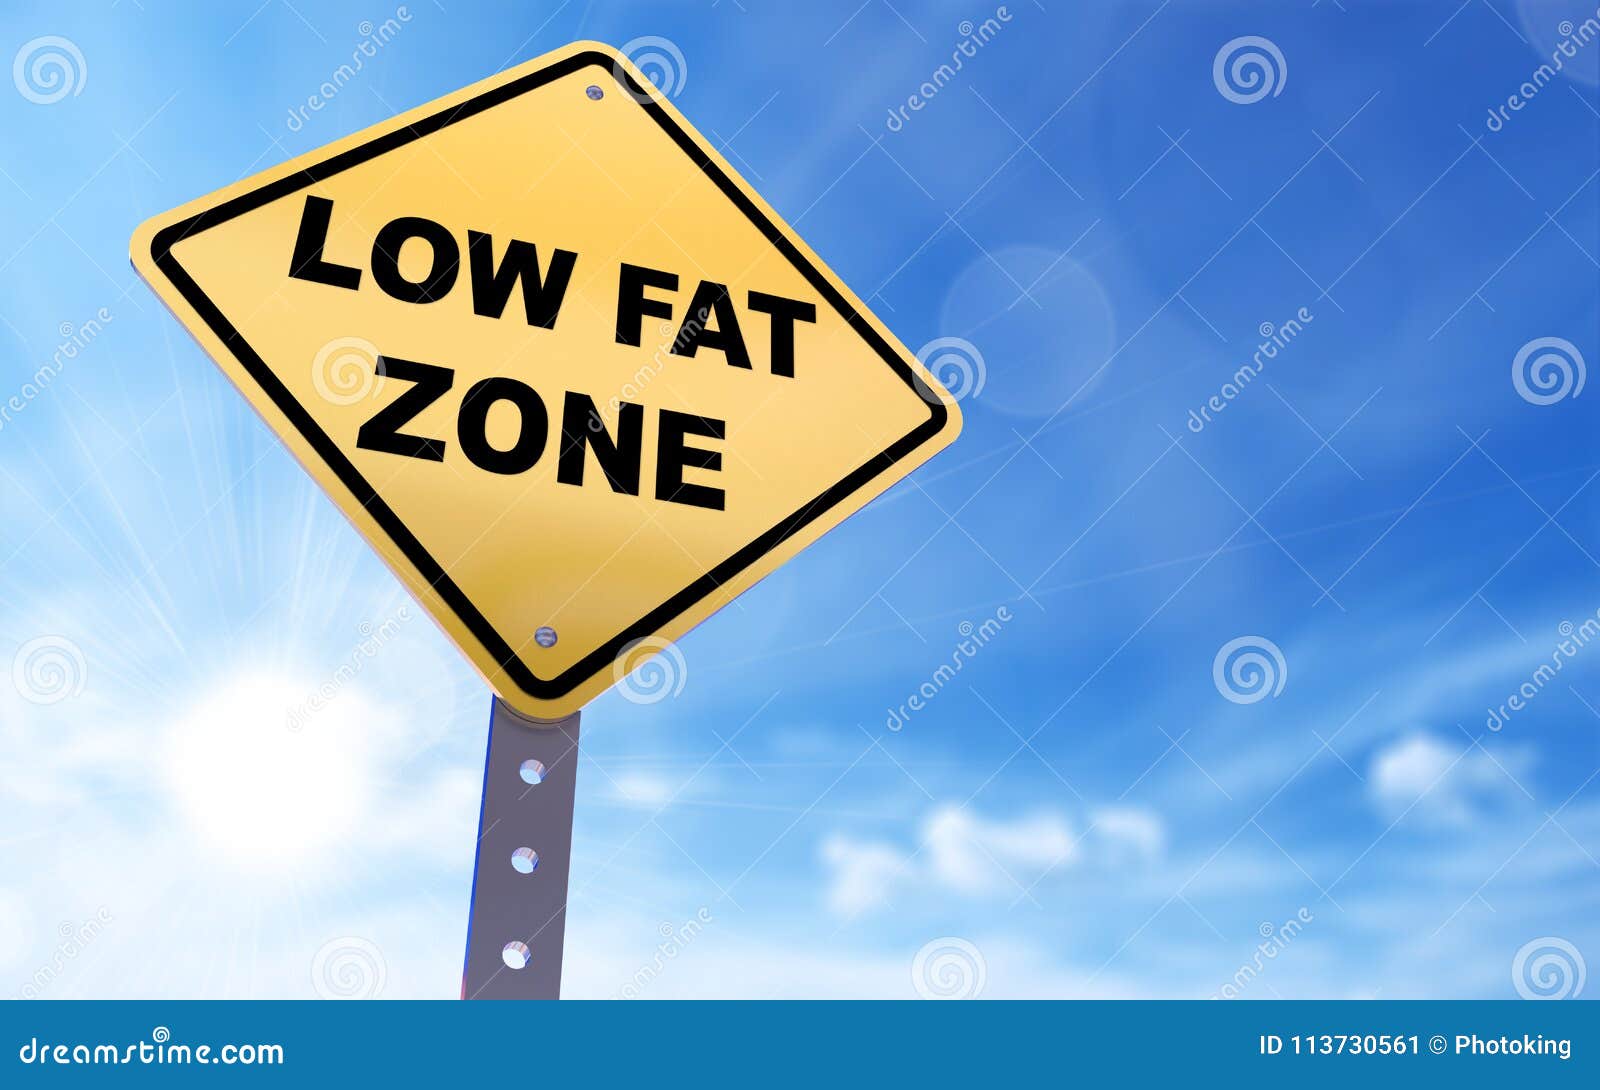 low fat zone sign